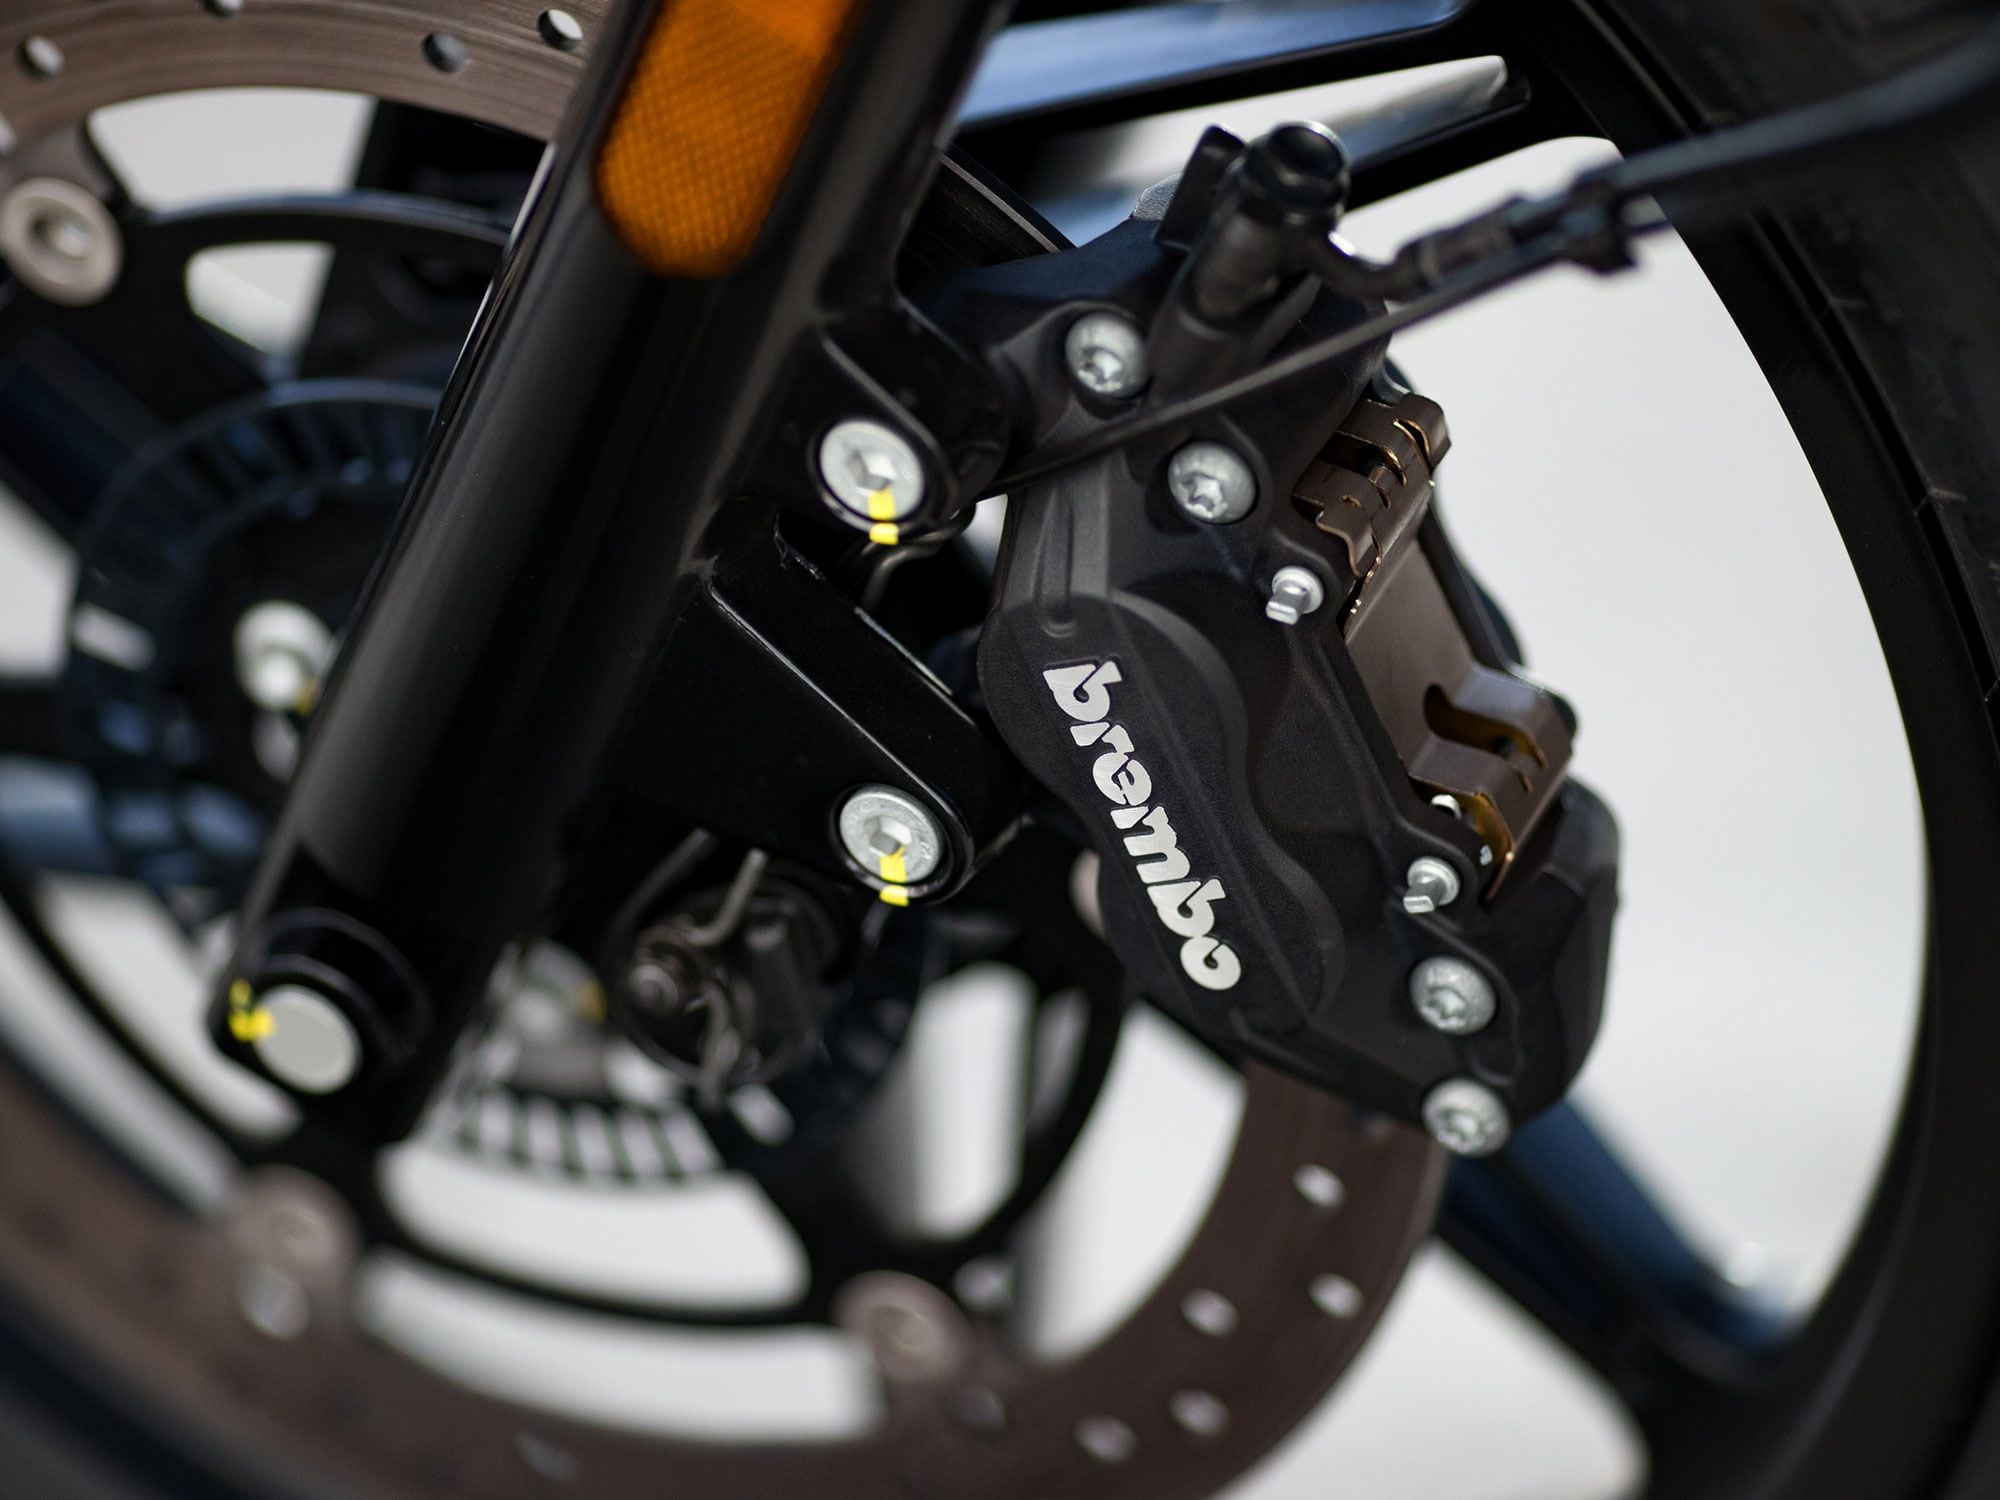 Brembo four-piston calipers provide excellent stopping power up front.